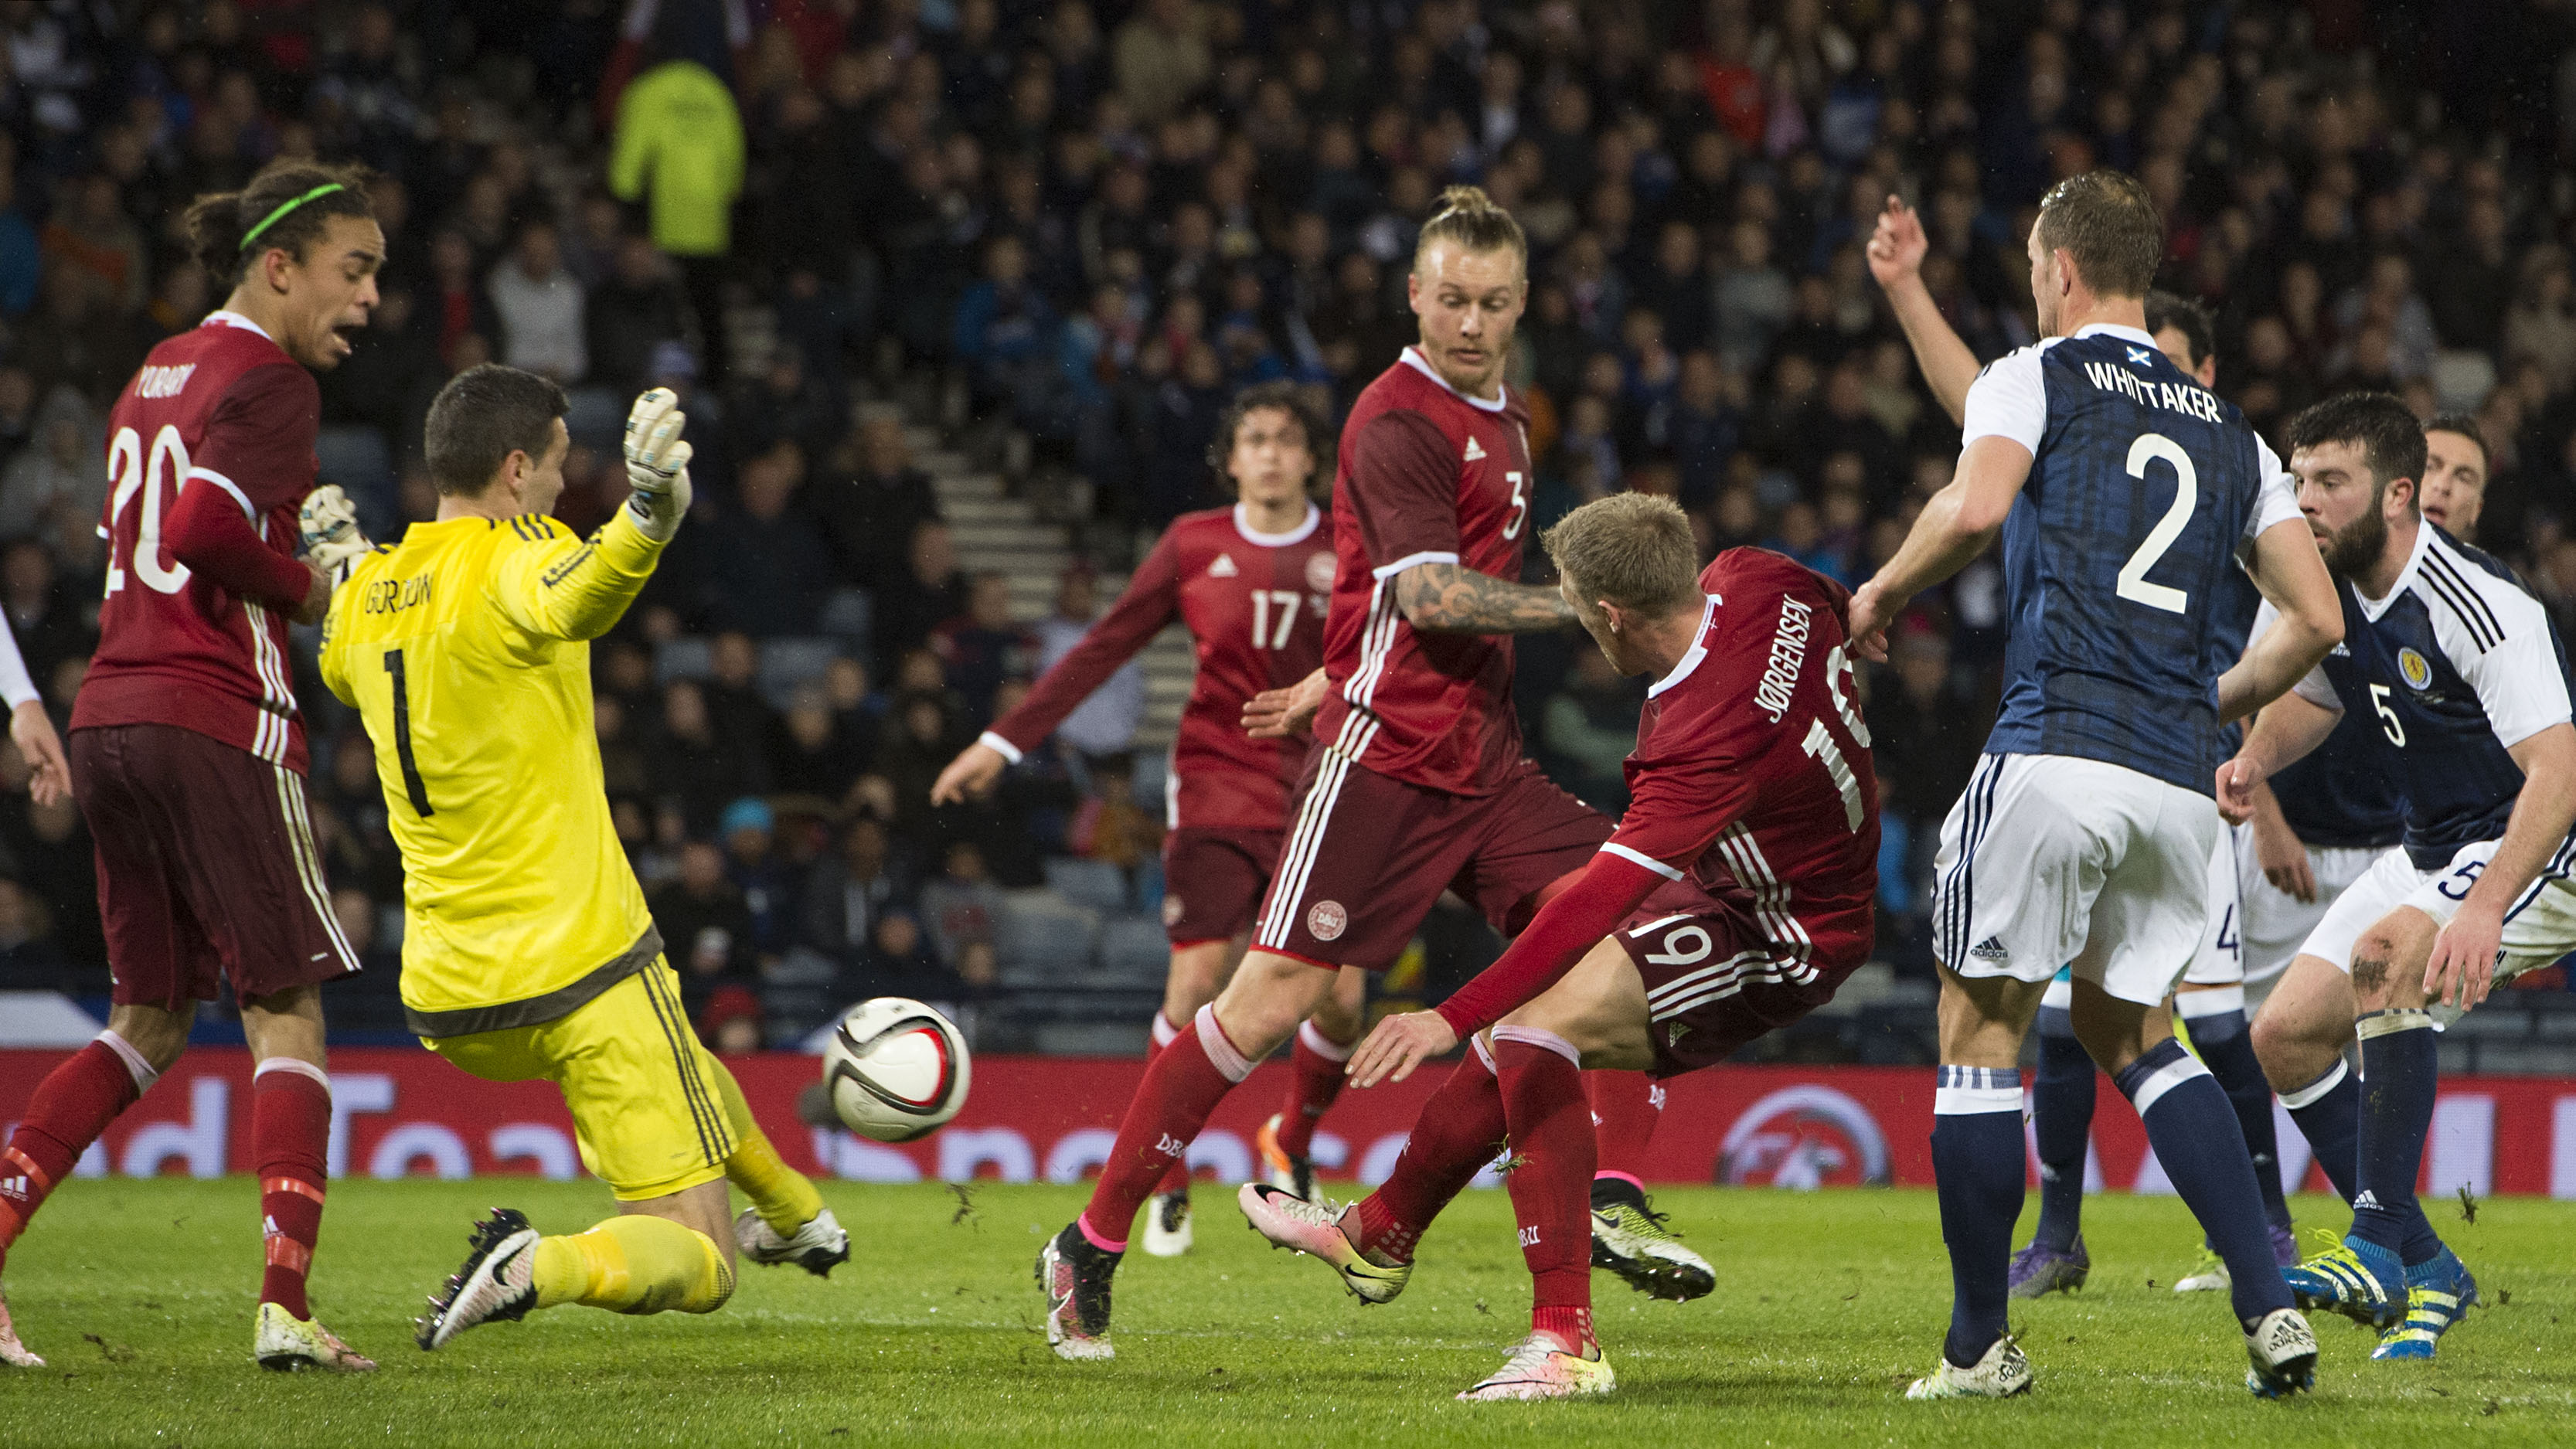 Scotland will resume rivalries with Denmark in their game in September.